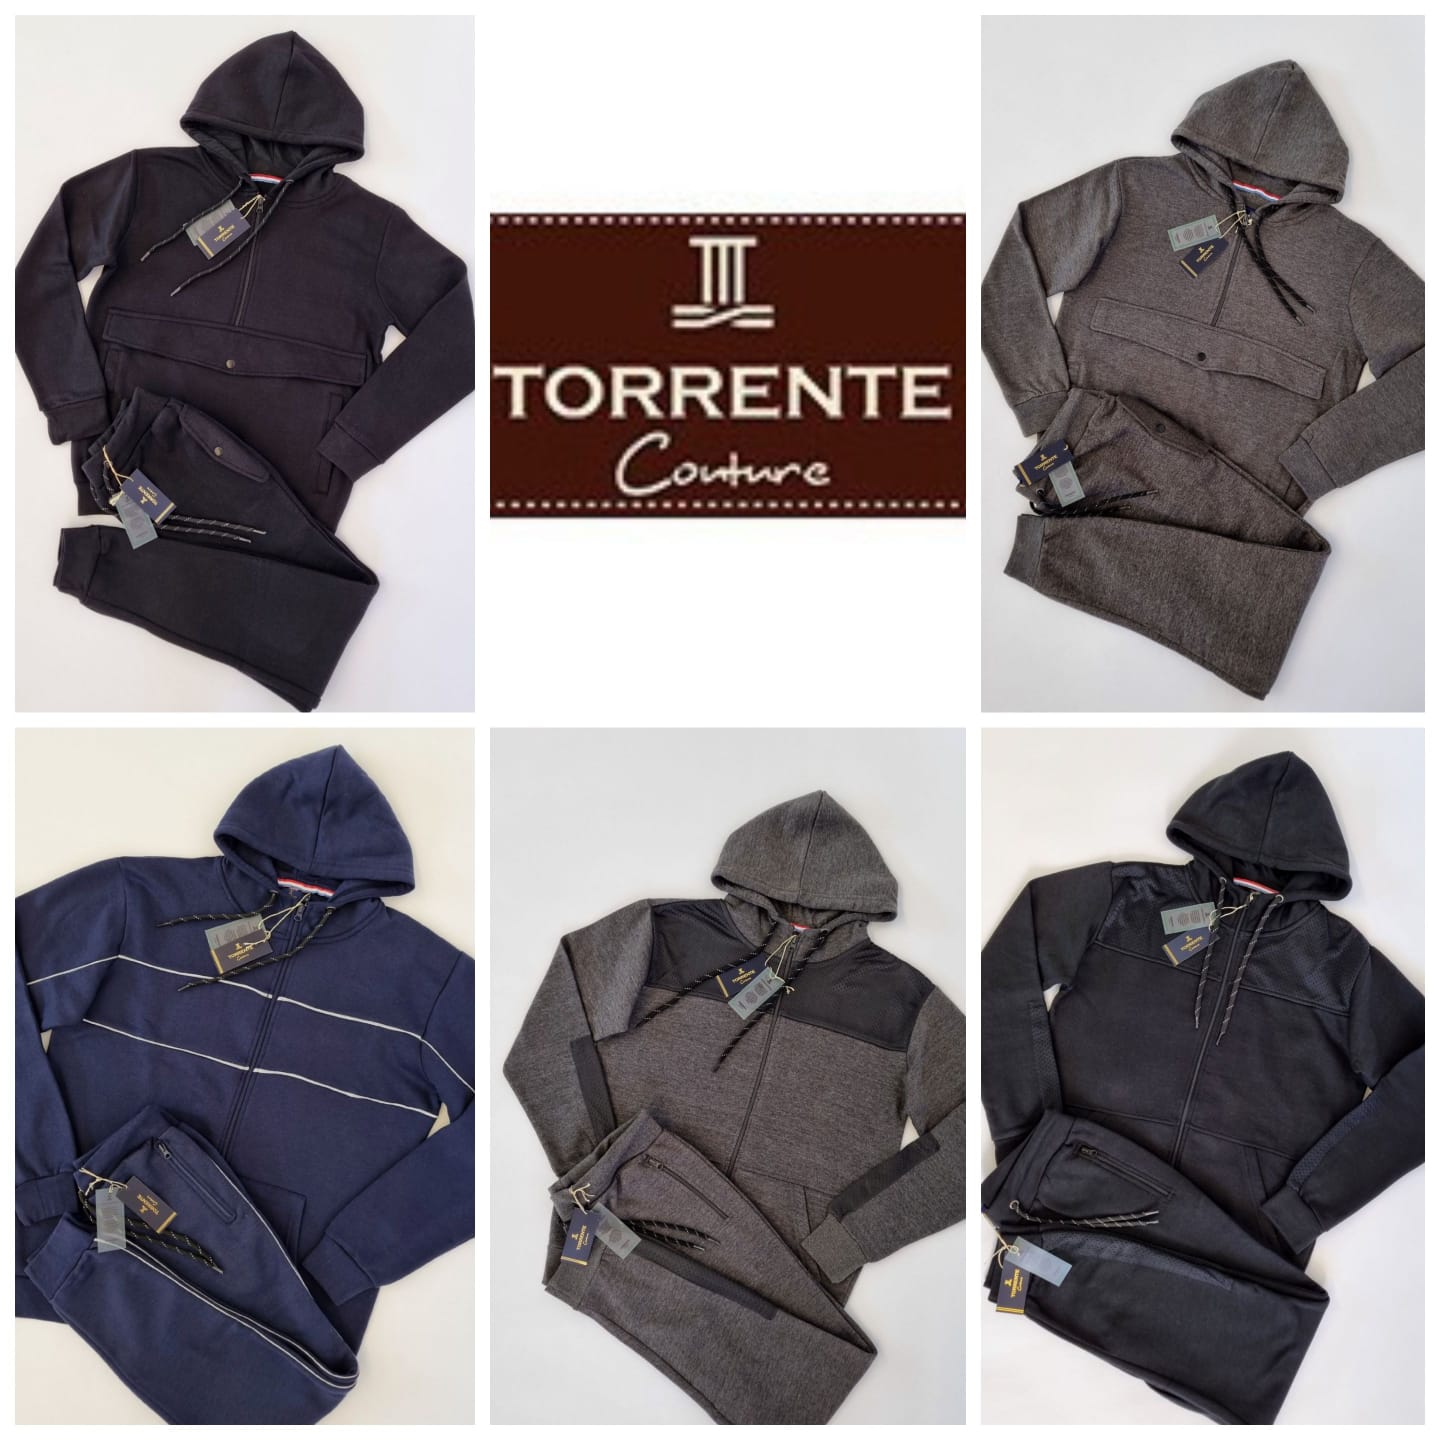 Torrente Couture tracksuits for men